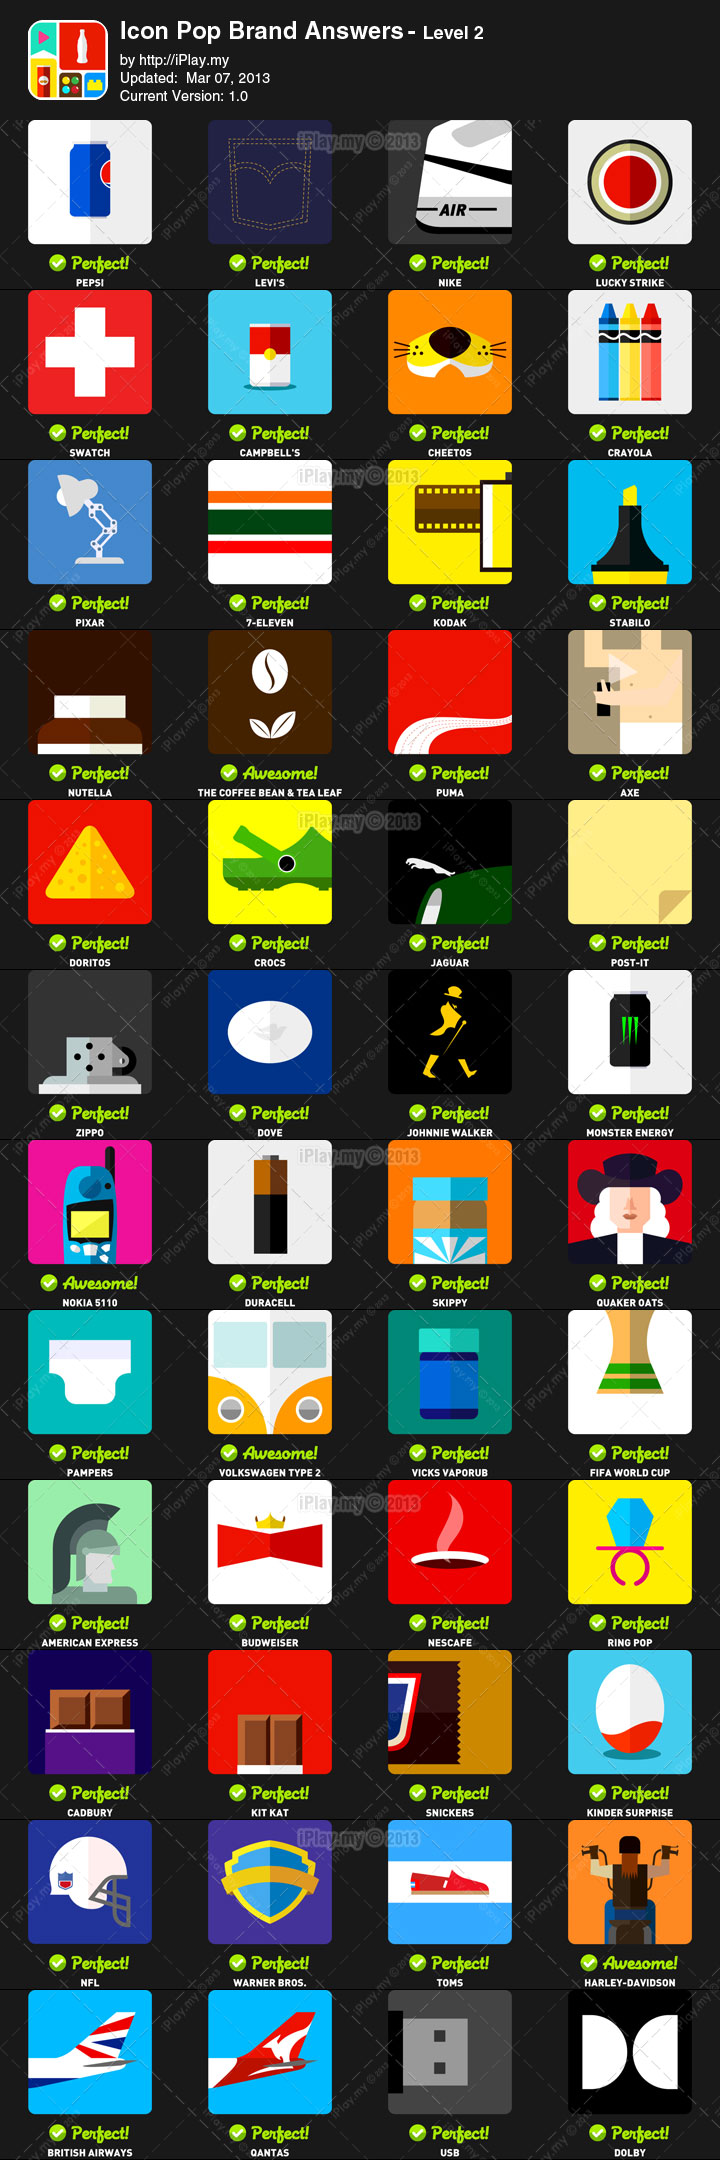 Icon Pop Brand Answers